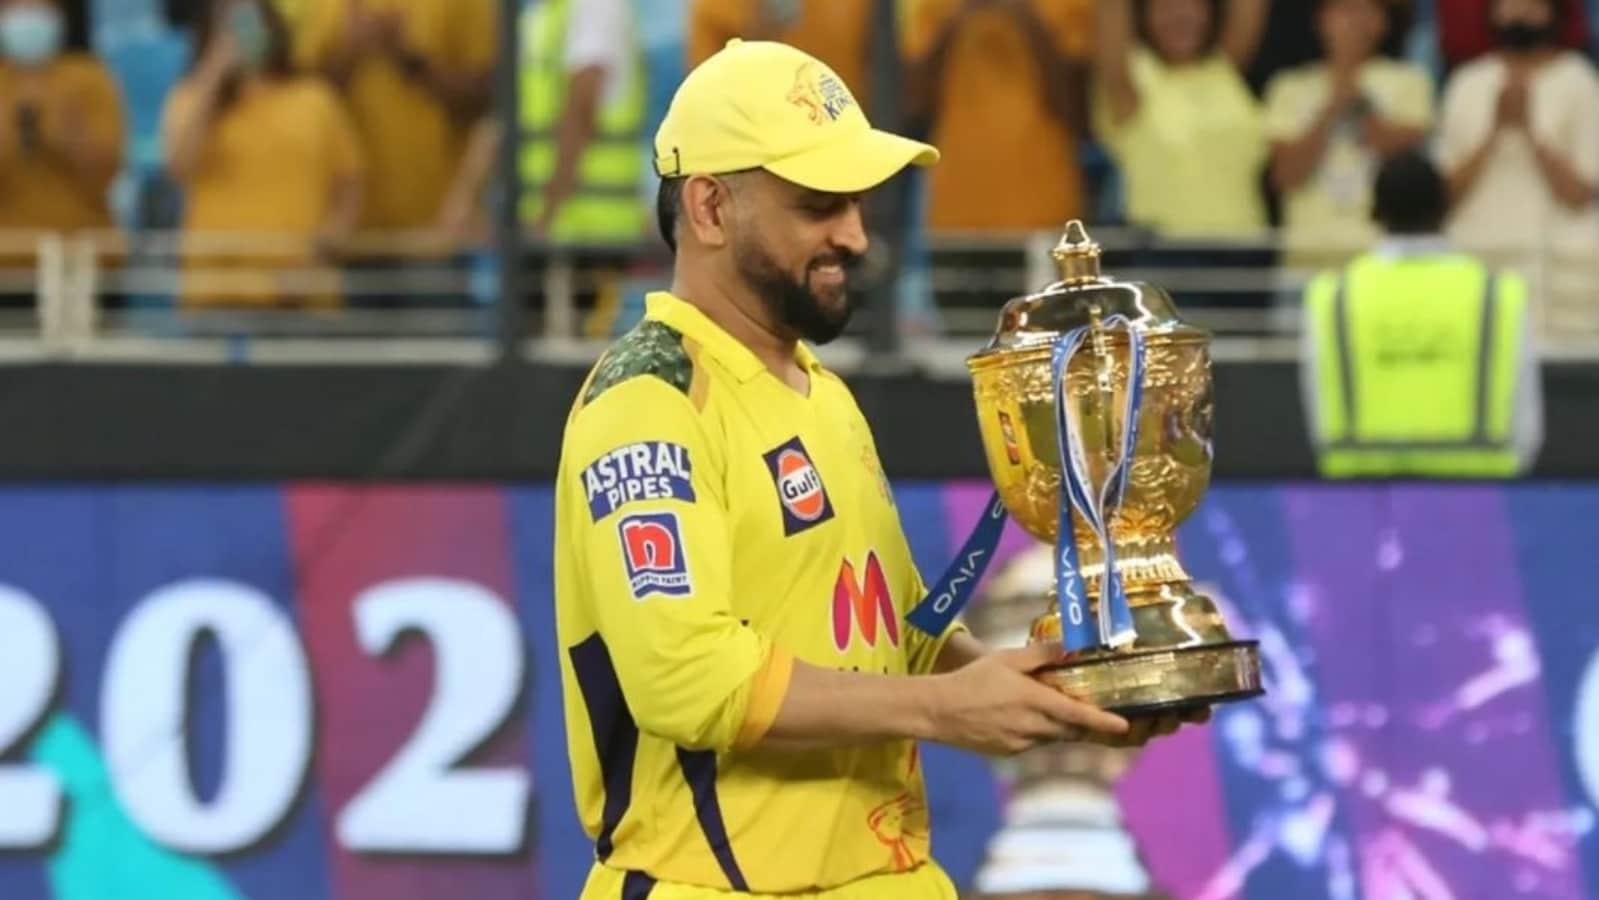 Dhoni Quits Captaincy: It's final! IPL 2022 will be MS Dhoni's last season as CSK player, to take up mentorship role from IPL 2023